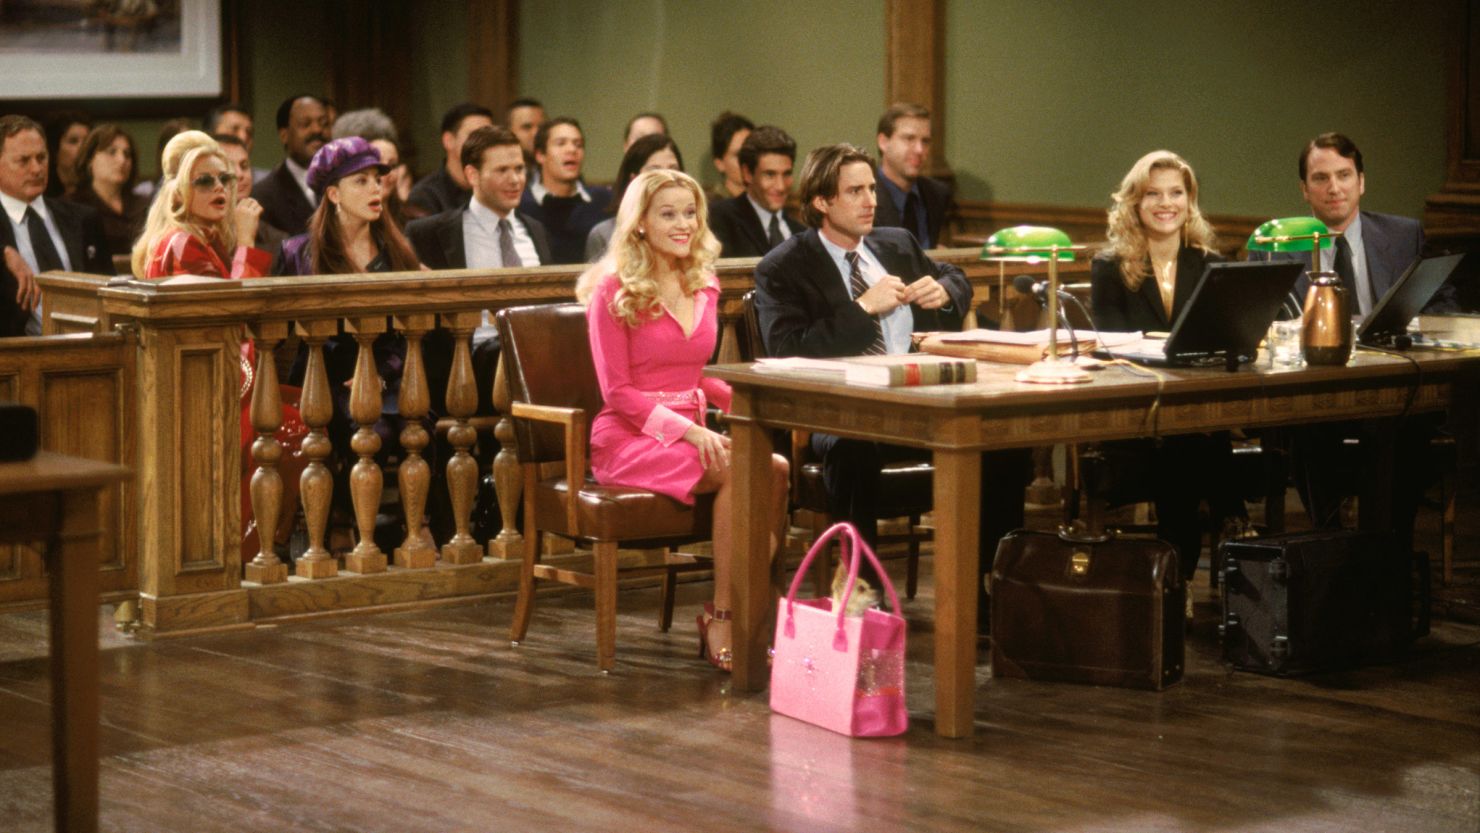 A new Amazon series will explore the past of Elle Woods, played in the 'Legally Blonde' movies by Reese Witherspoon (center), who is shown in a scene from the first film.